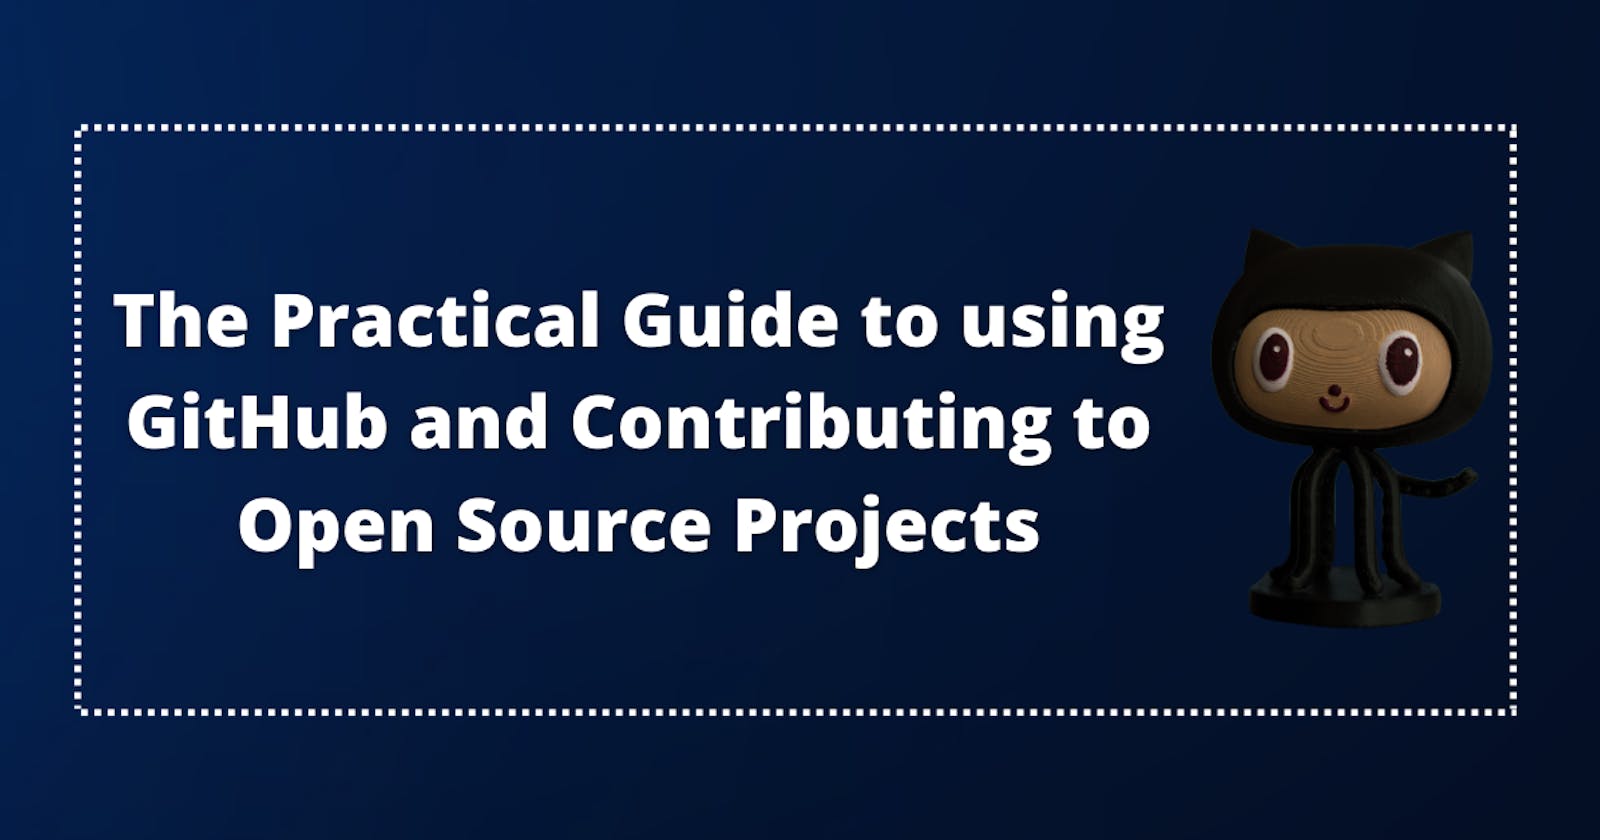 The Practical Guide to Contributing to Open Source Projects